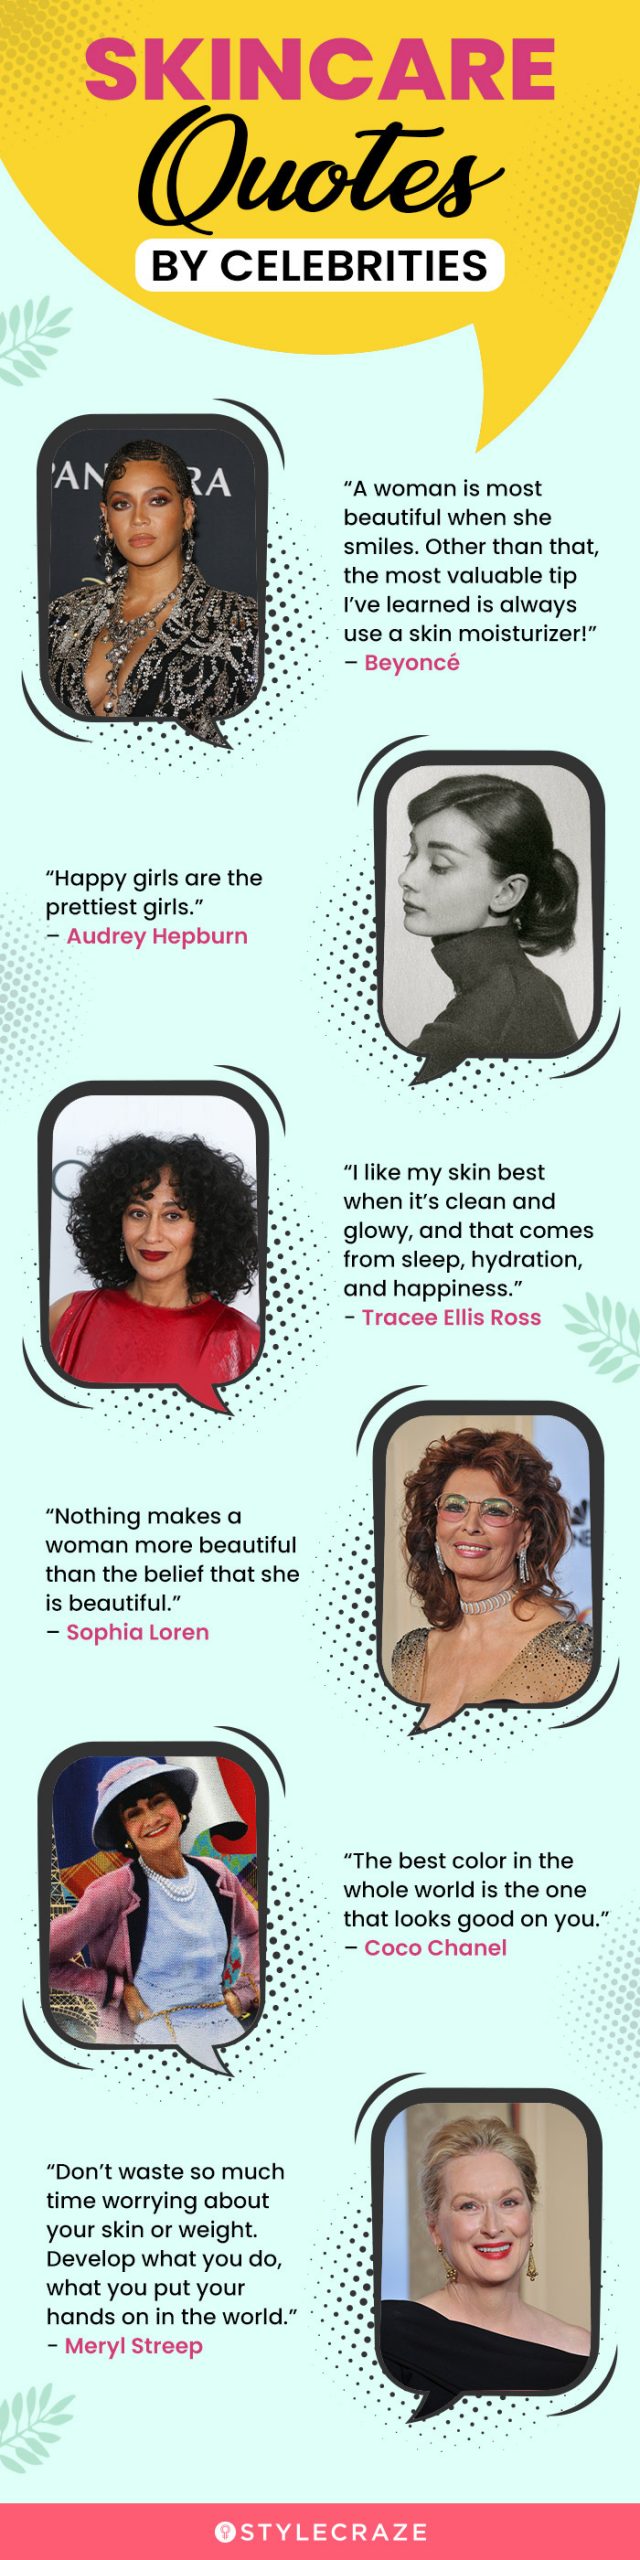 skincare quotes by celebrities (infographic)